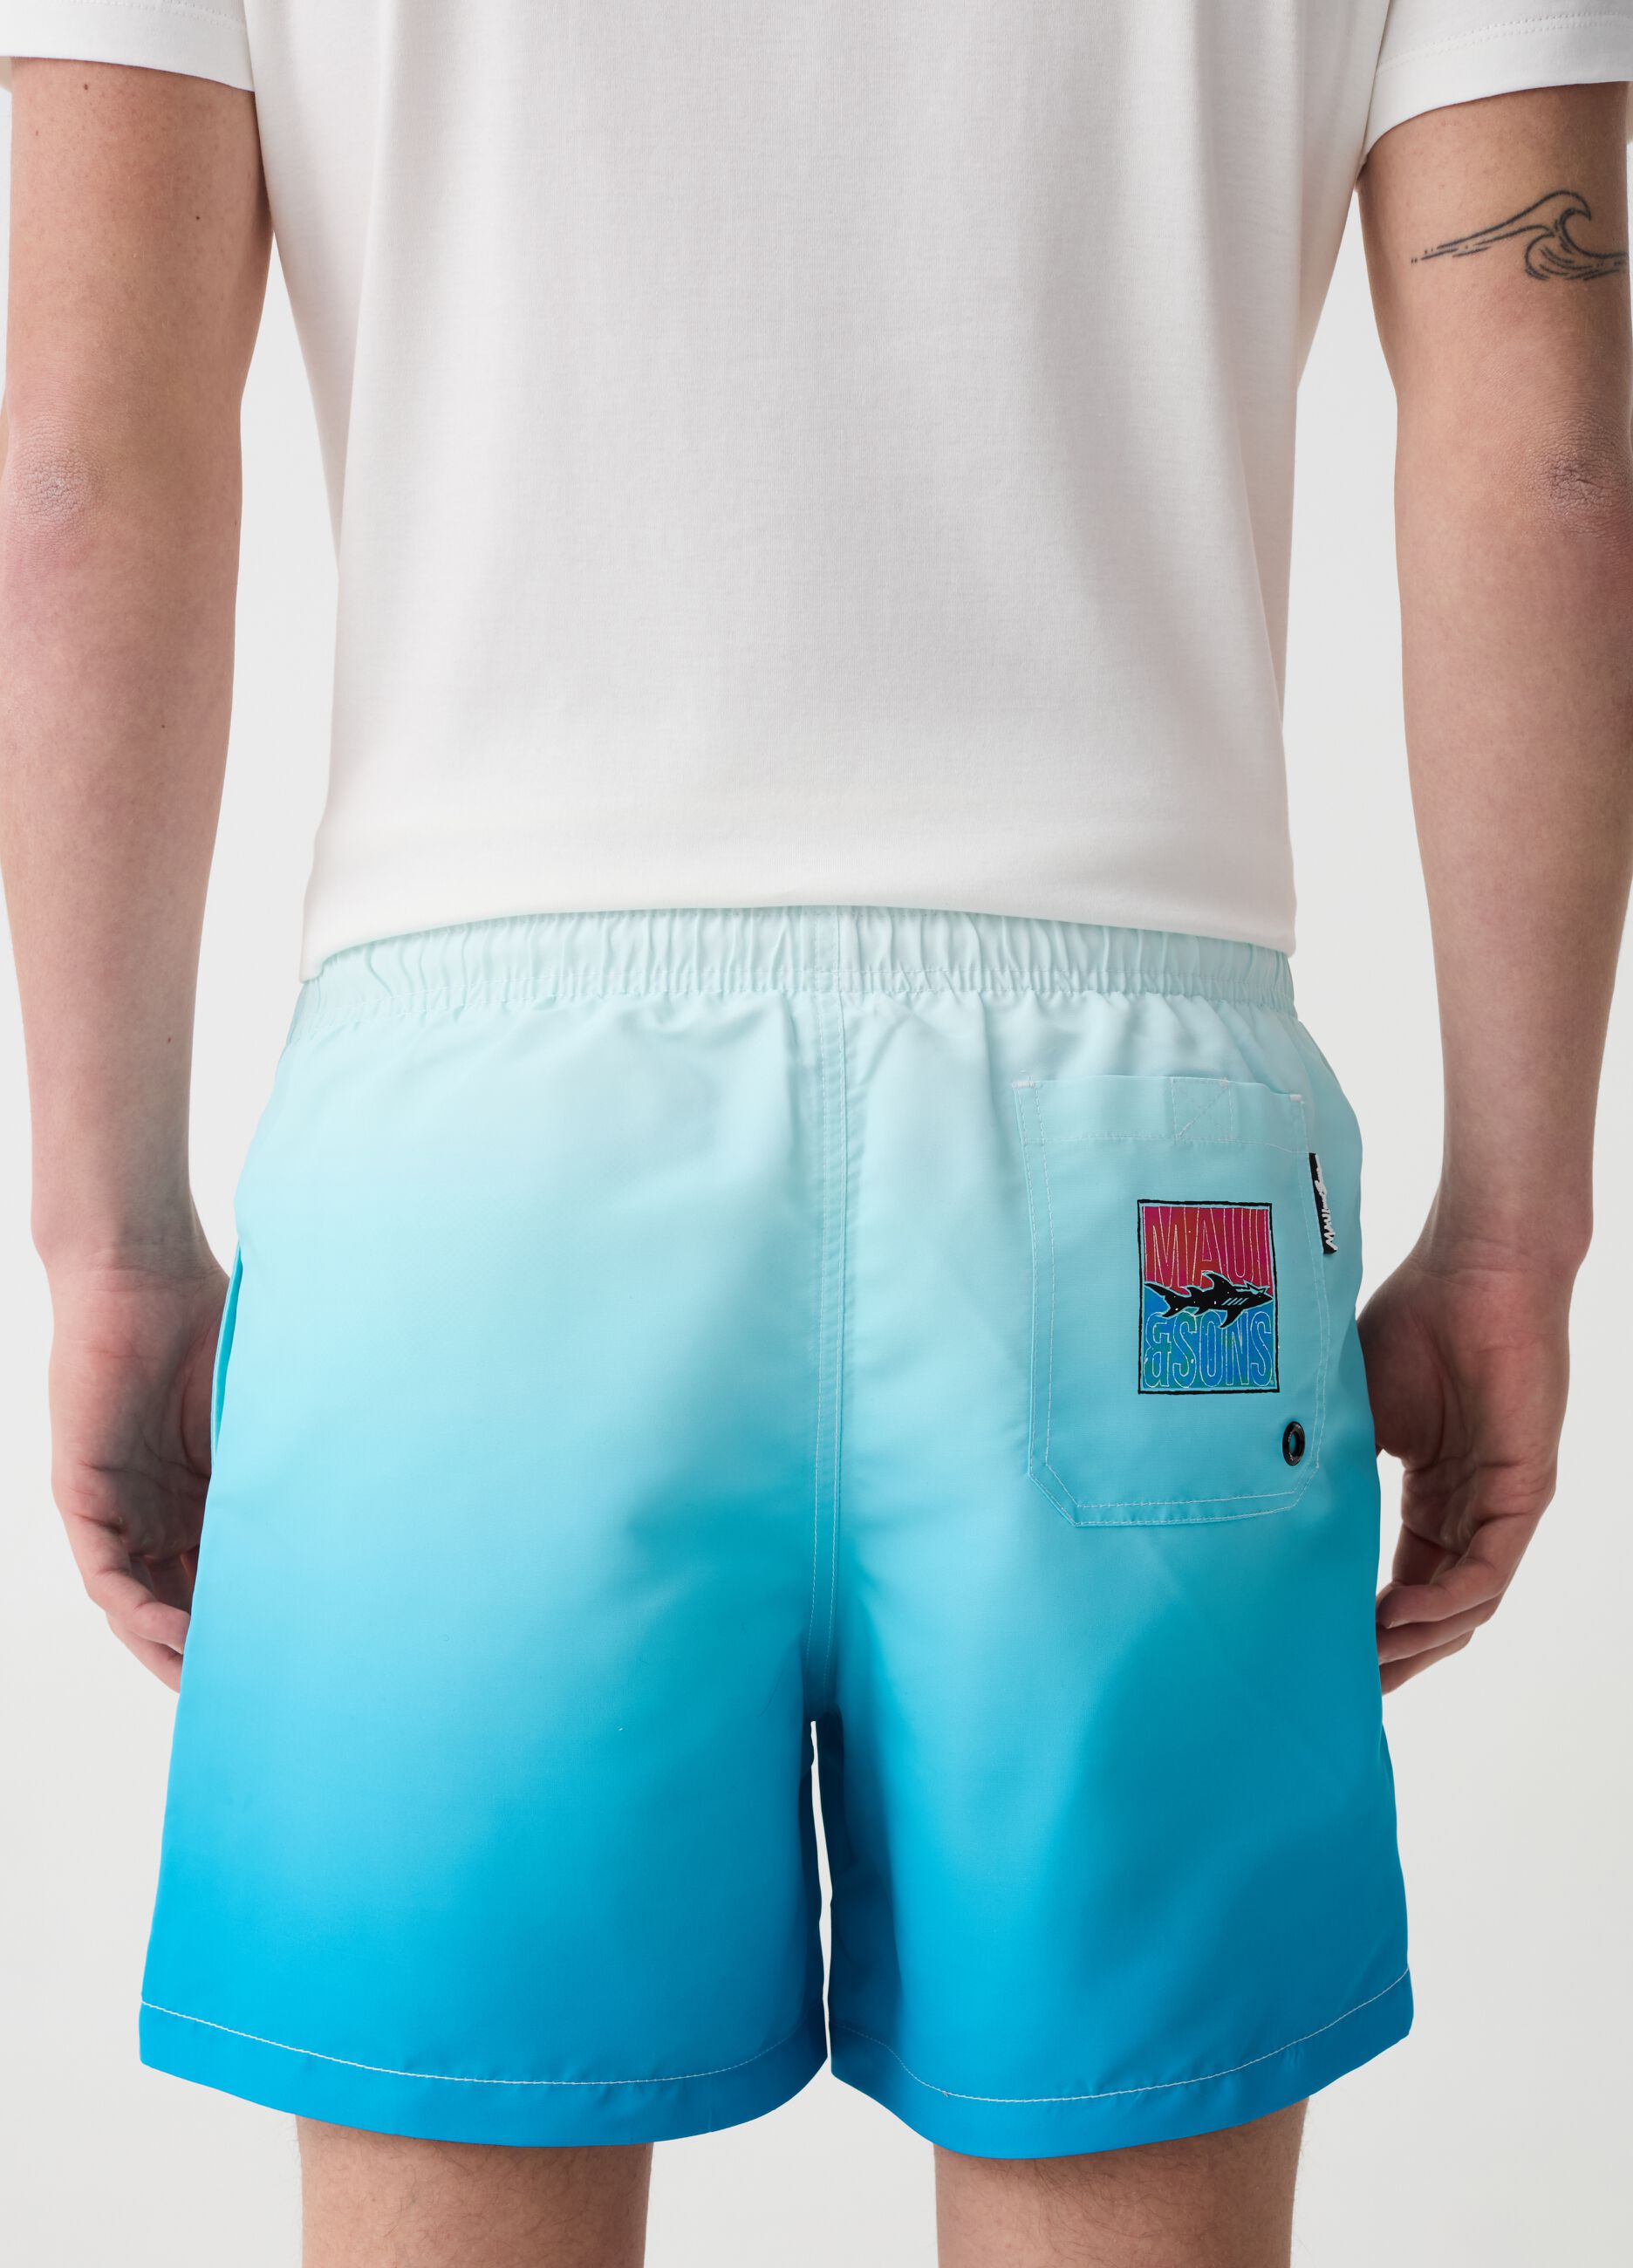 Degradé swimming trunks with logo patch